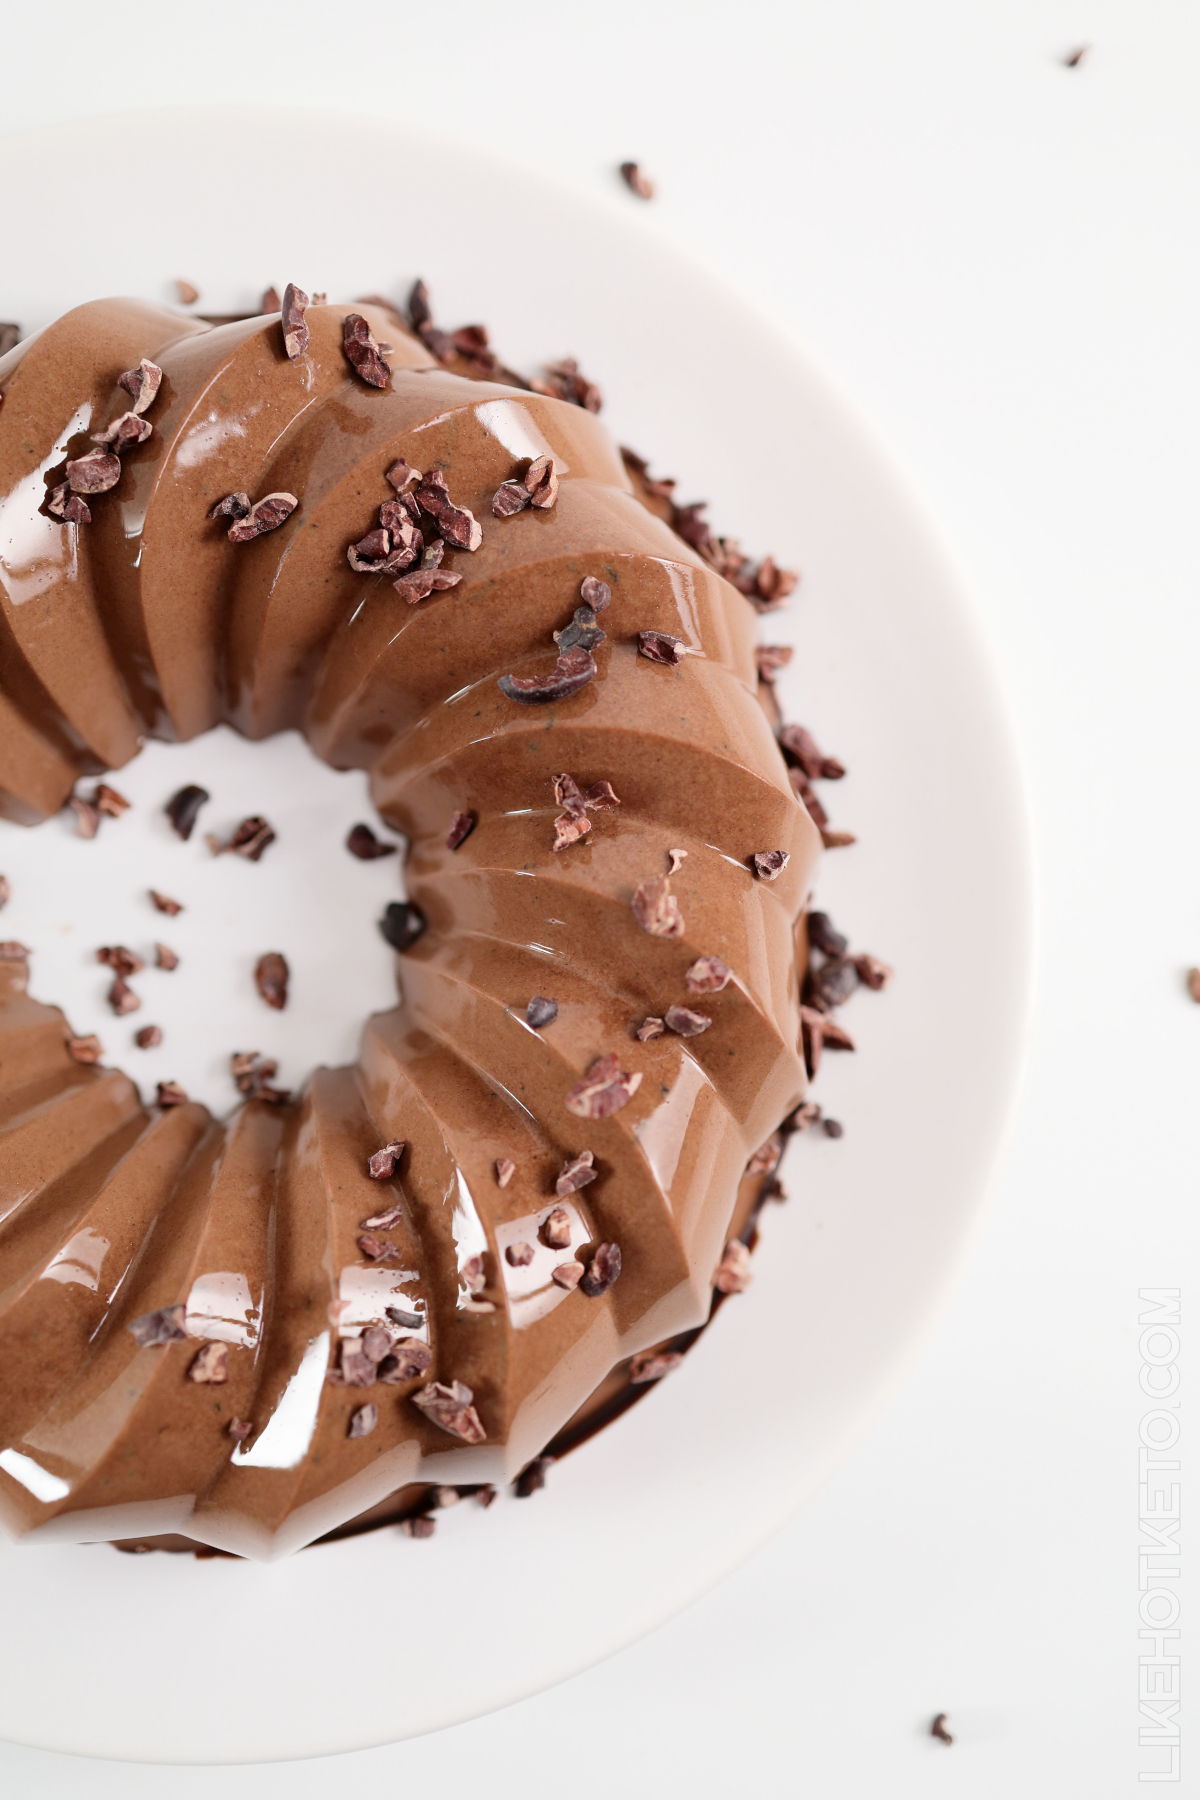 Sugar-free chocolate protein jello mold served with cacao nibs.